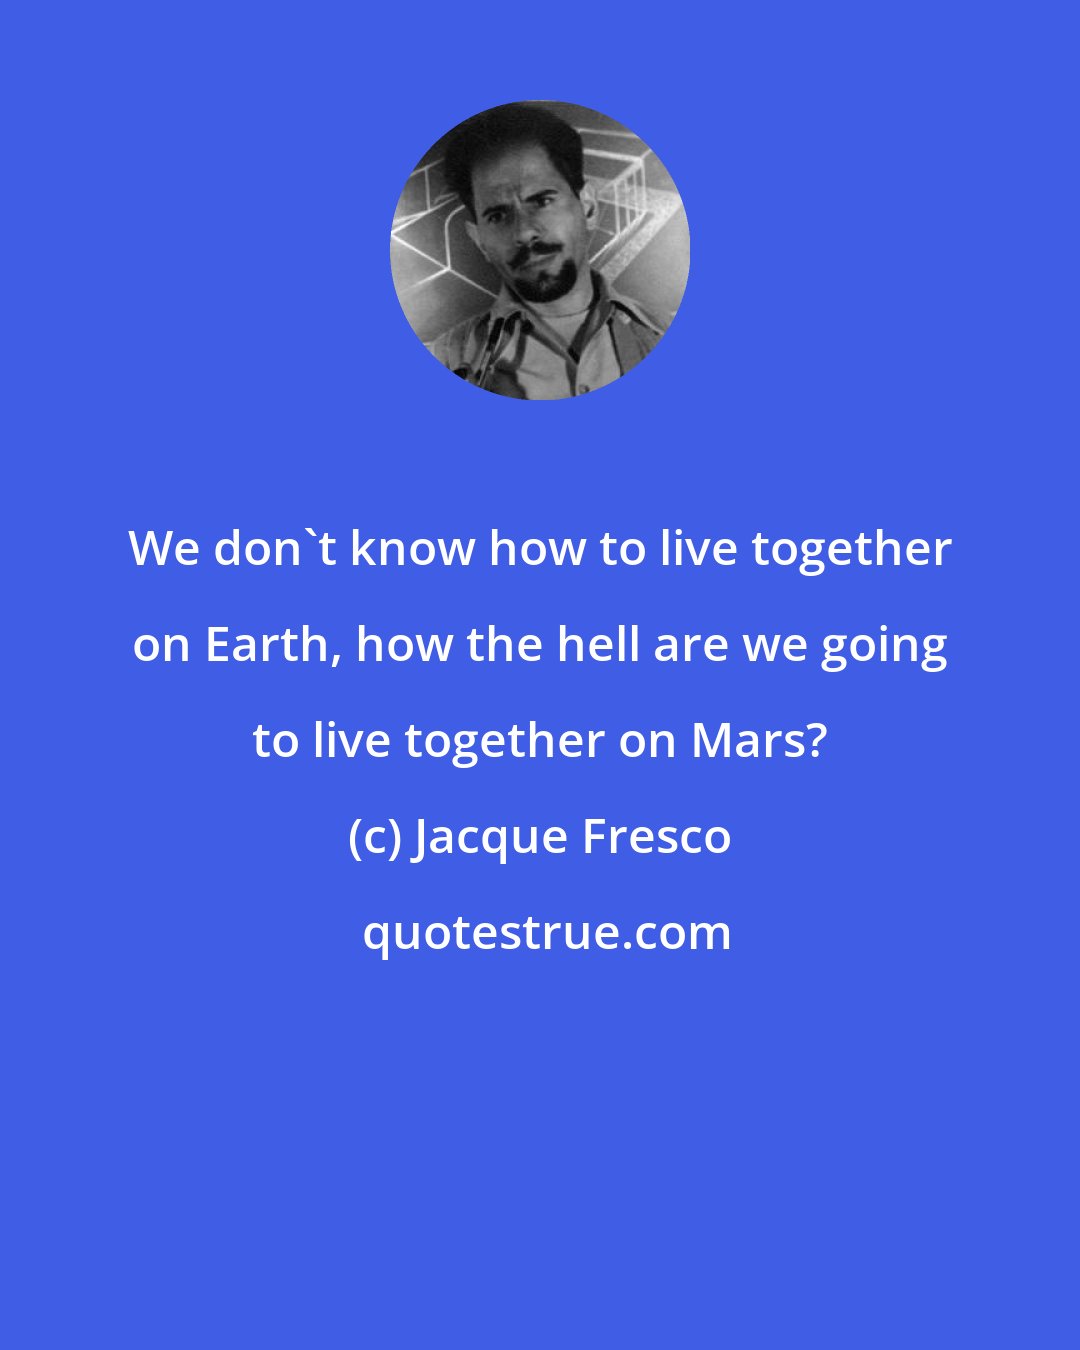 Jacque Fresco: We don't know how to live together on Earth, how the hell are we going to live together on Mars?